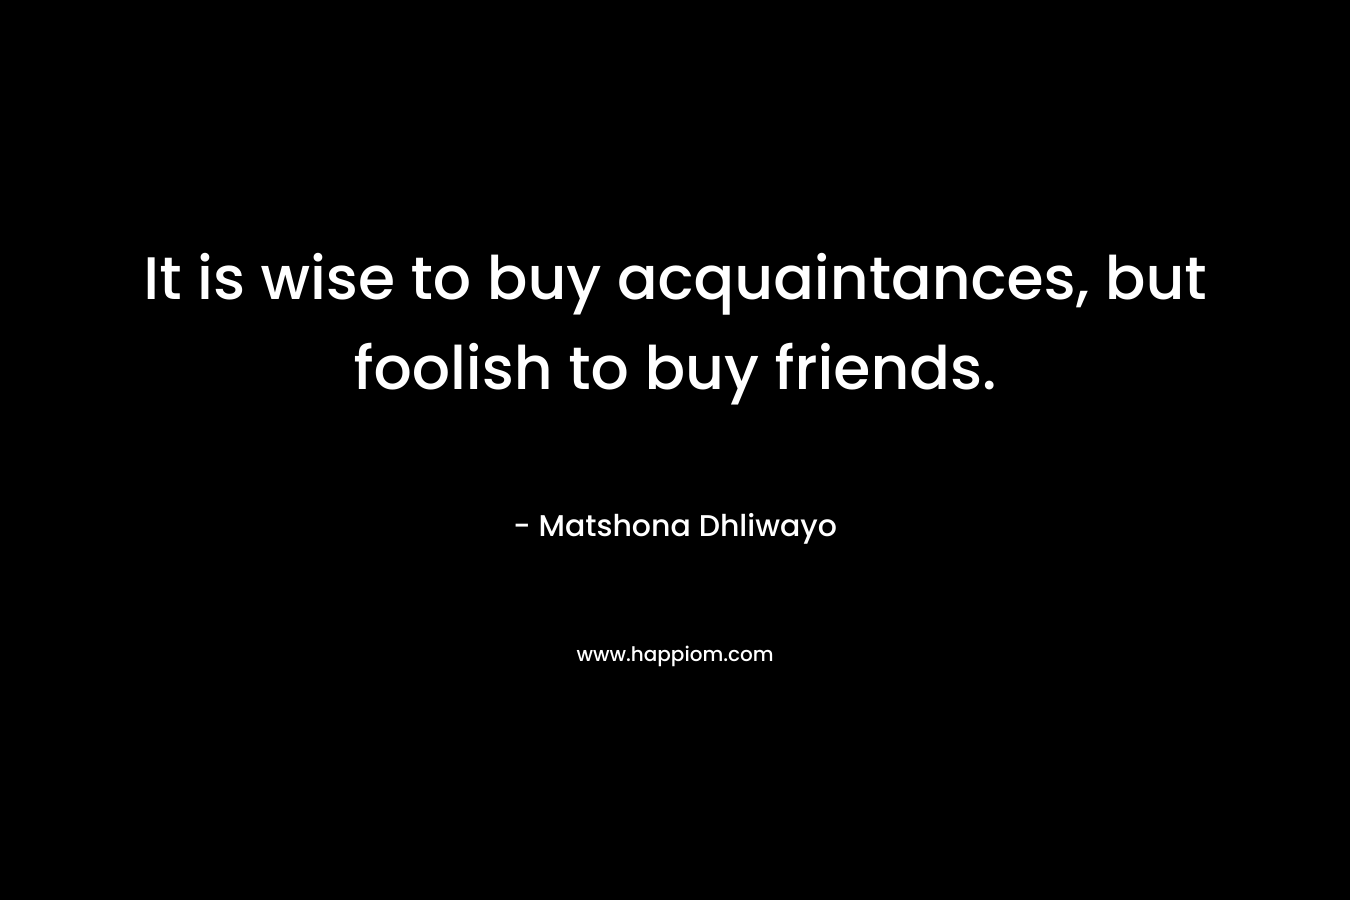 It is wise to buy acquaintances, but foolish to buy friends.